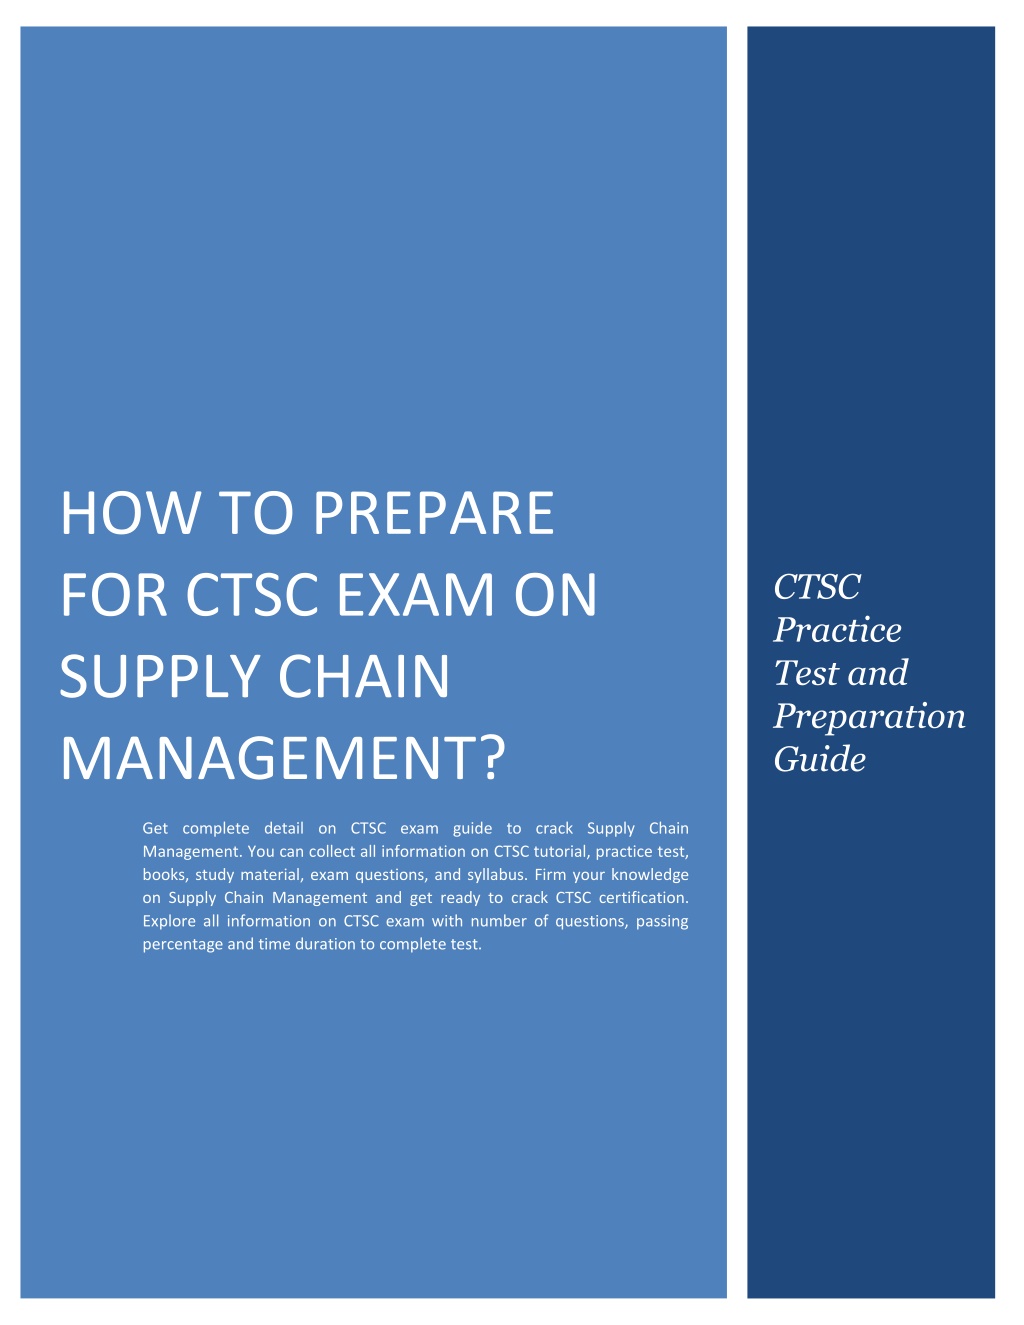 how to prepare for ctsc exam on supply chain l.w